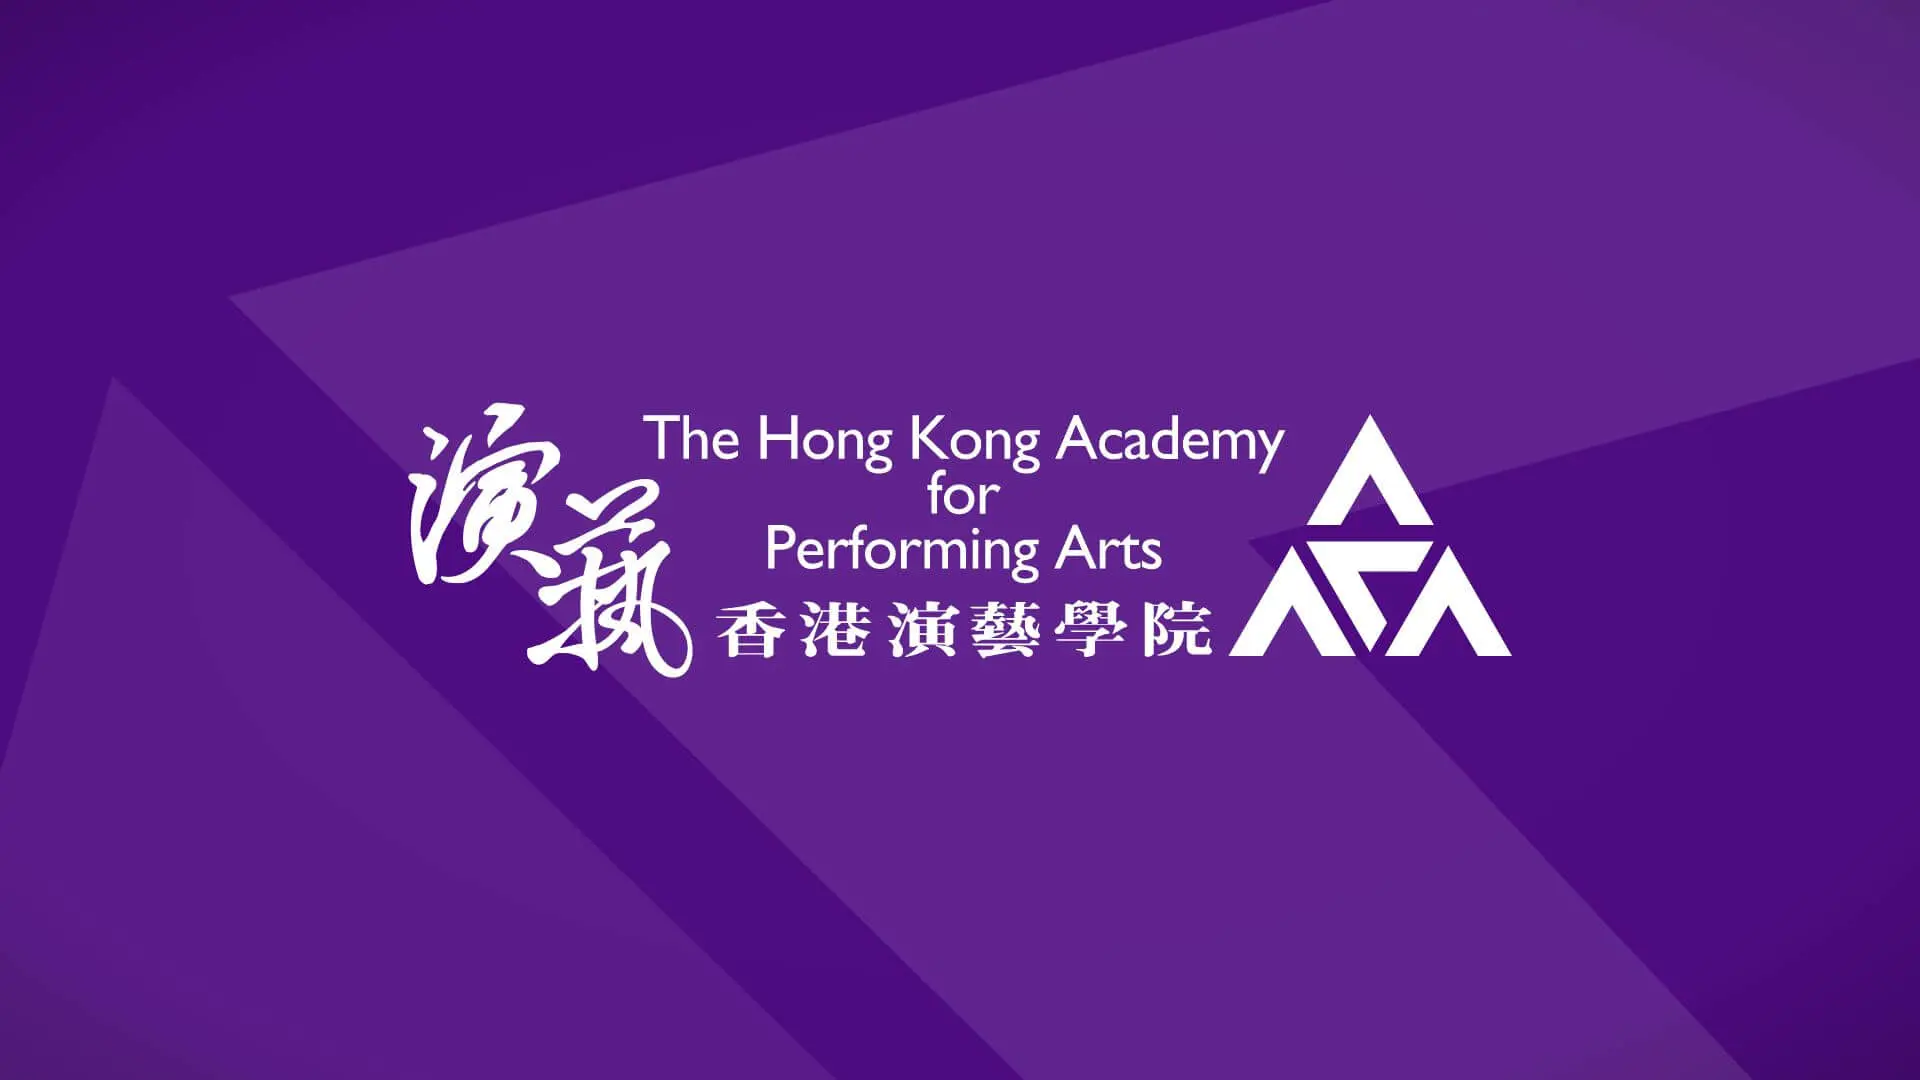 Academy Percussion Composition Concert in collaboration with Bun-Ching Lam, Toolbox Percussion,  and  South China Normal University 演藝敲擊作品音樂會-作曲系與林品晶，敲擊襄，華南師範大學合作演出               